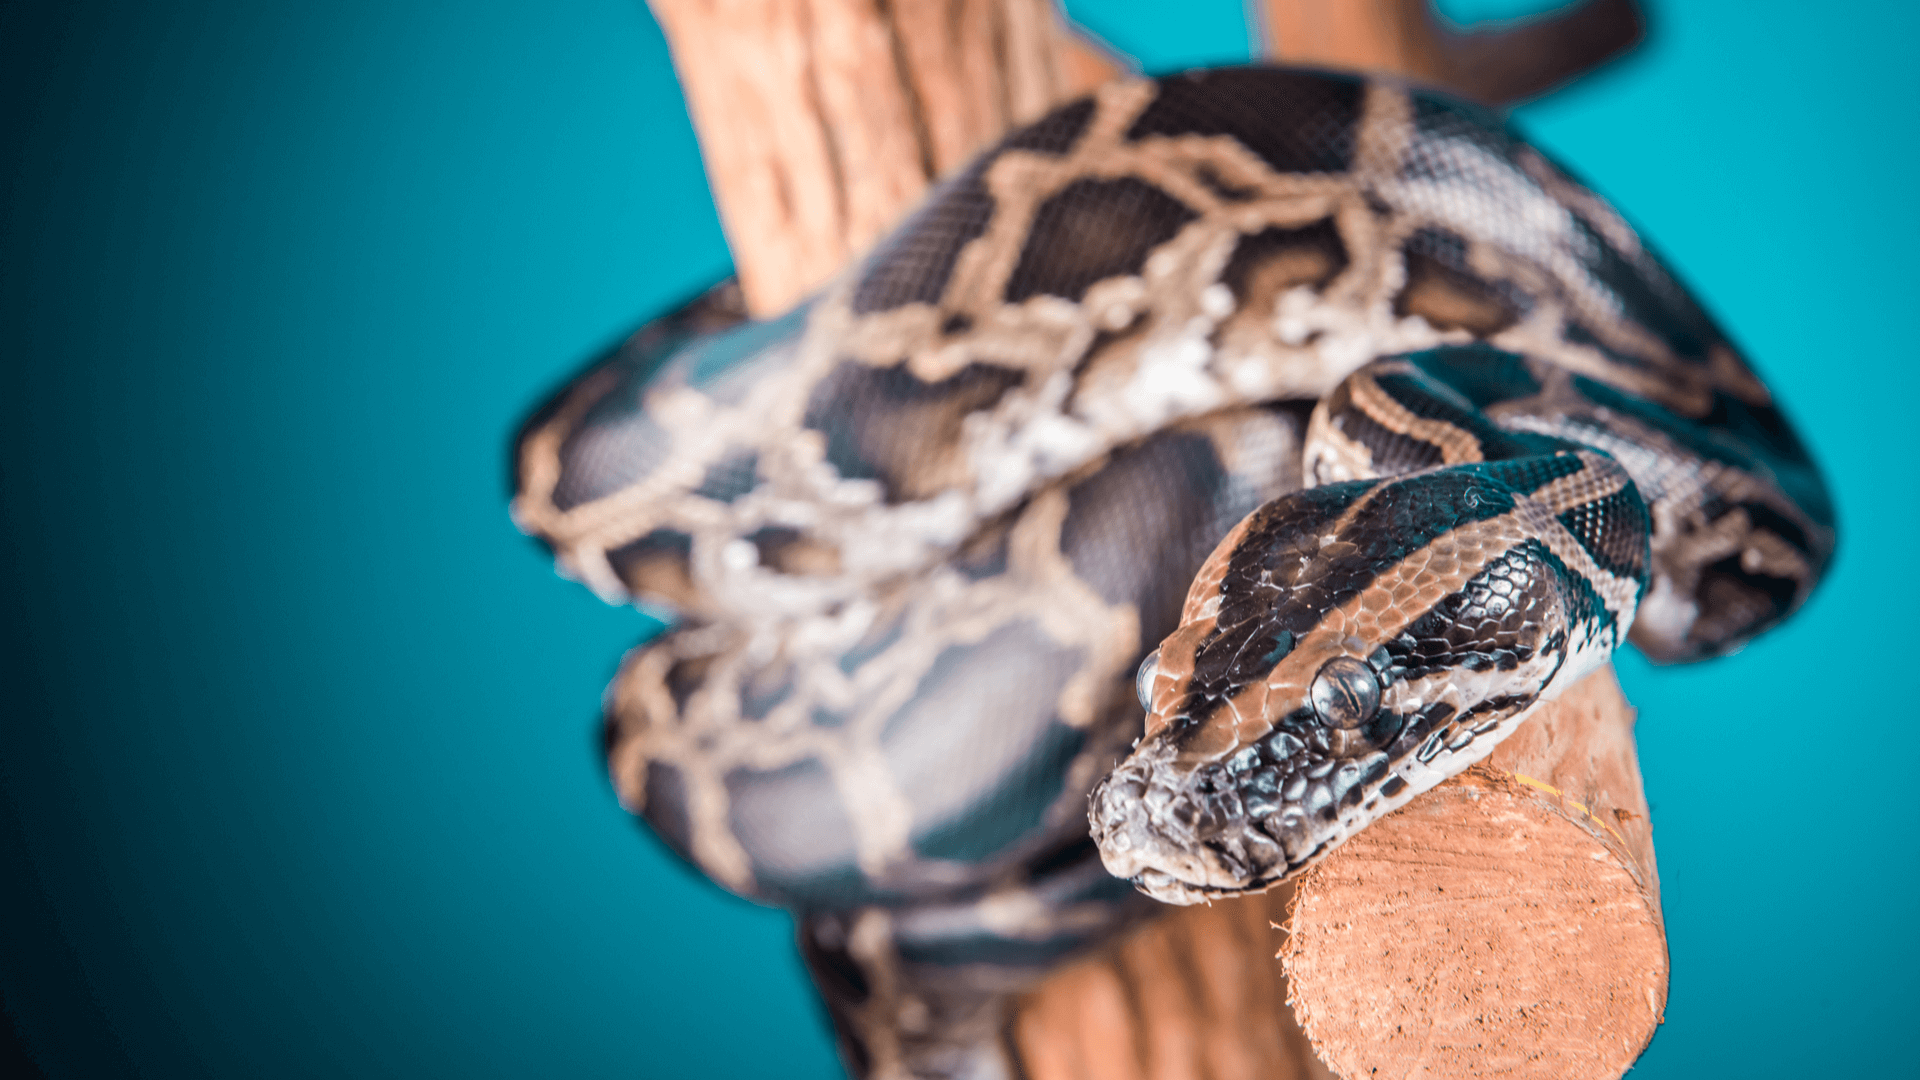 Betsy the Burmese Python wrapped around a branch